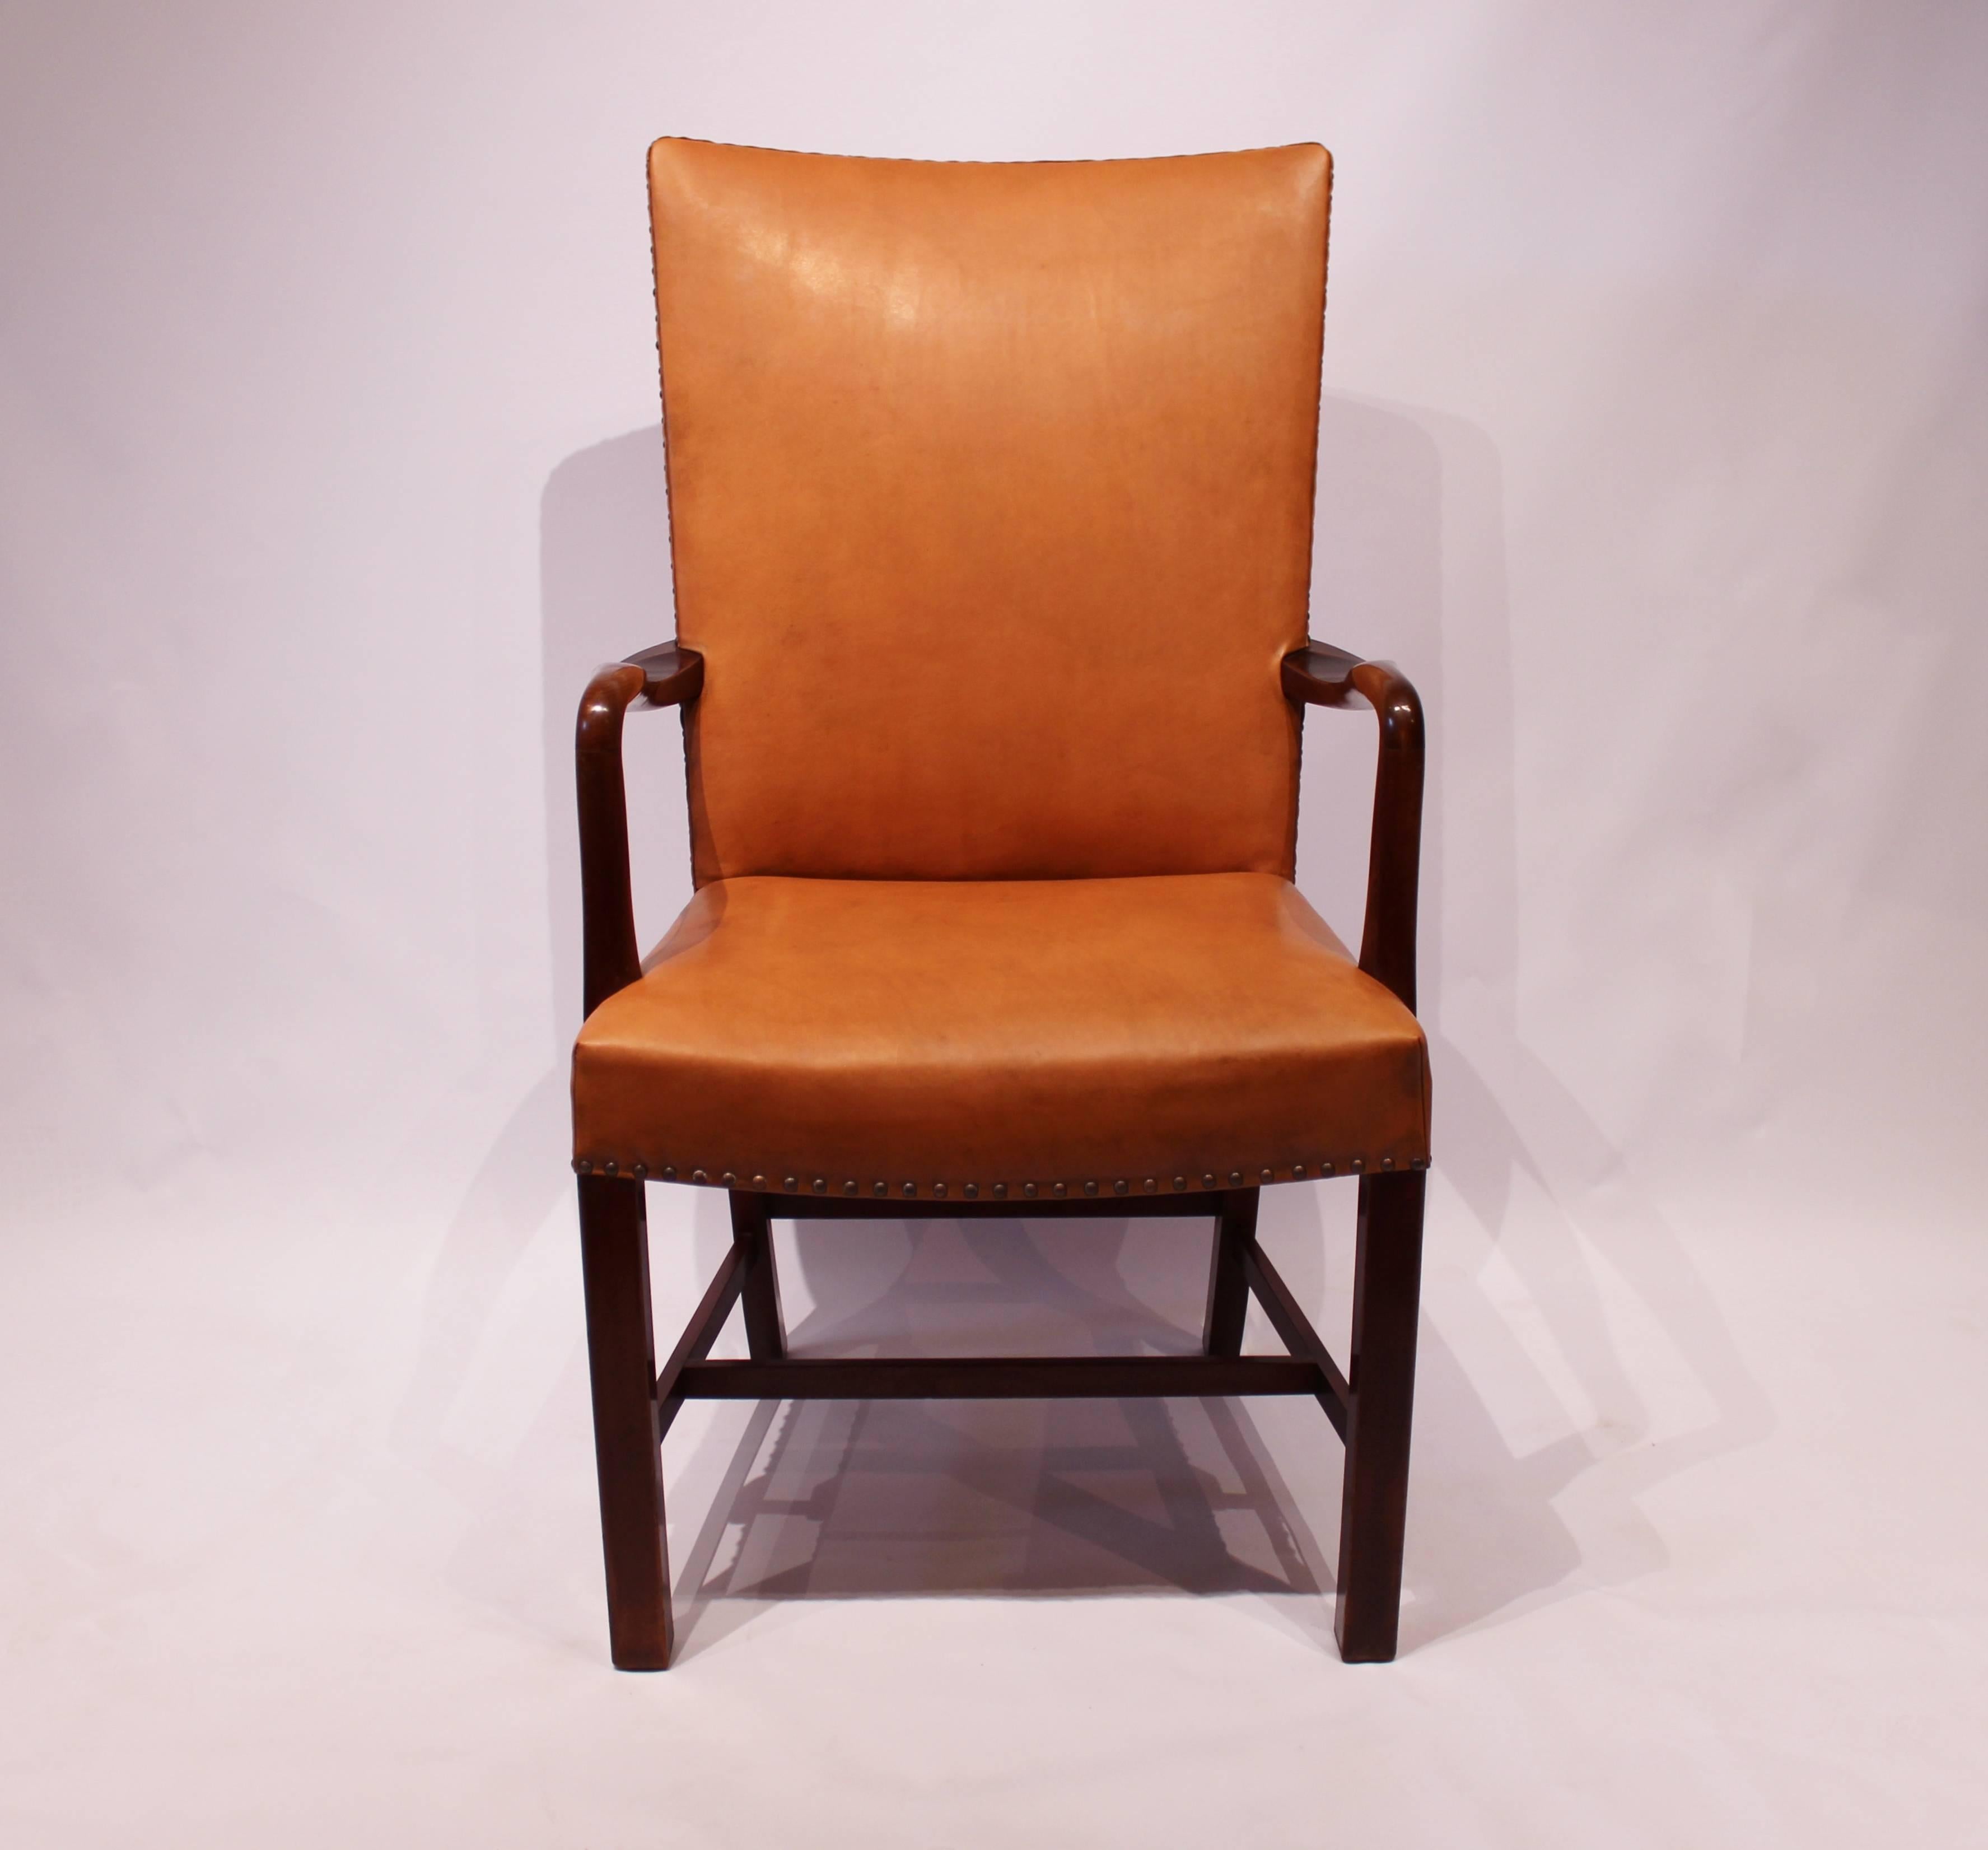 
An armchair upholstered in cognac-colored Elegance leather with polished dark wood and brass pins, designed by Fritz Hansen in 1944, showcases a beautiful blend of classic design and luxurious materials.

Fritz Hansen is a well-known Danish